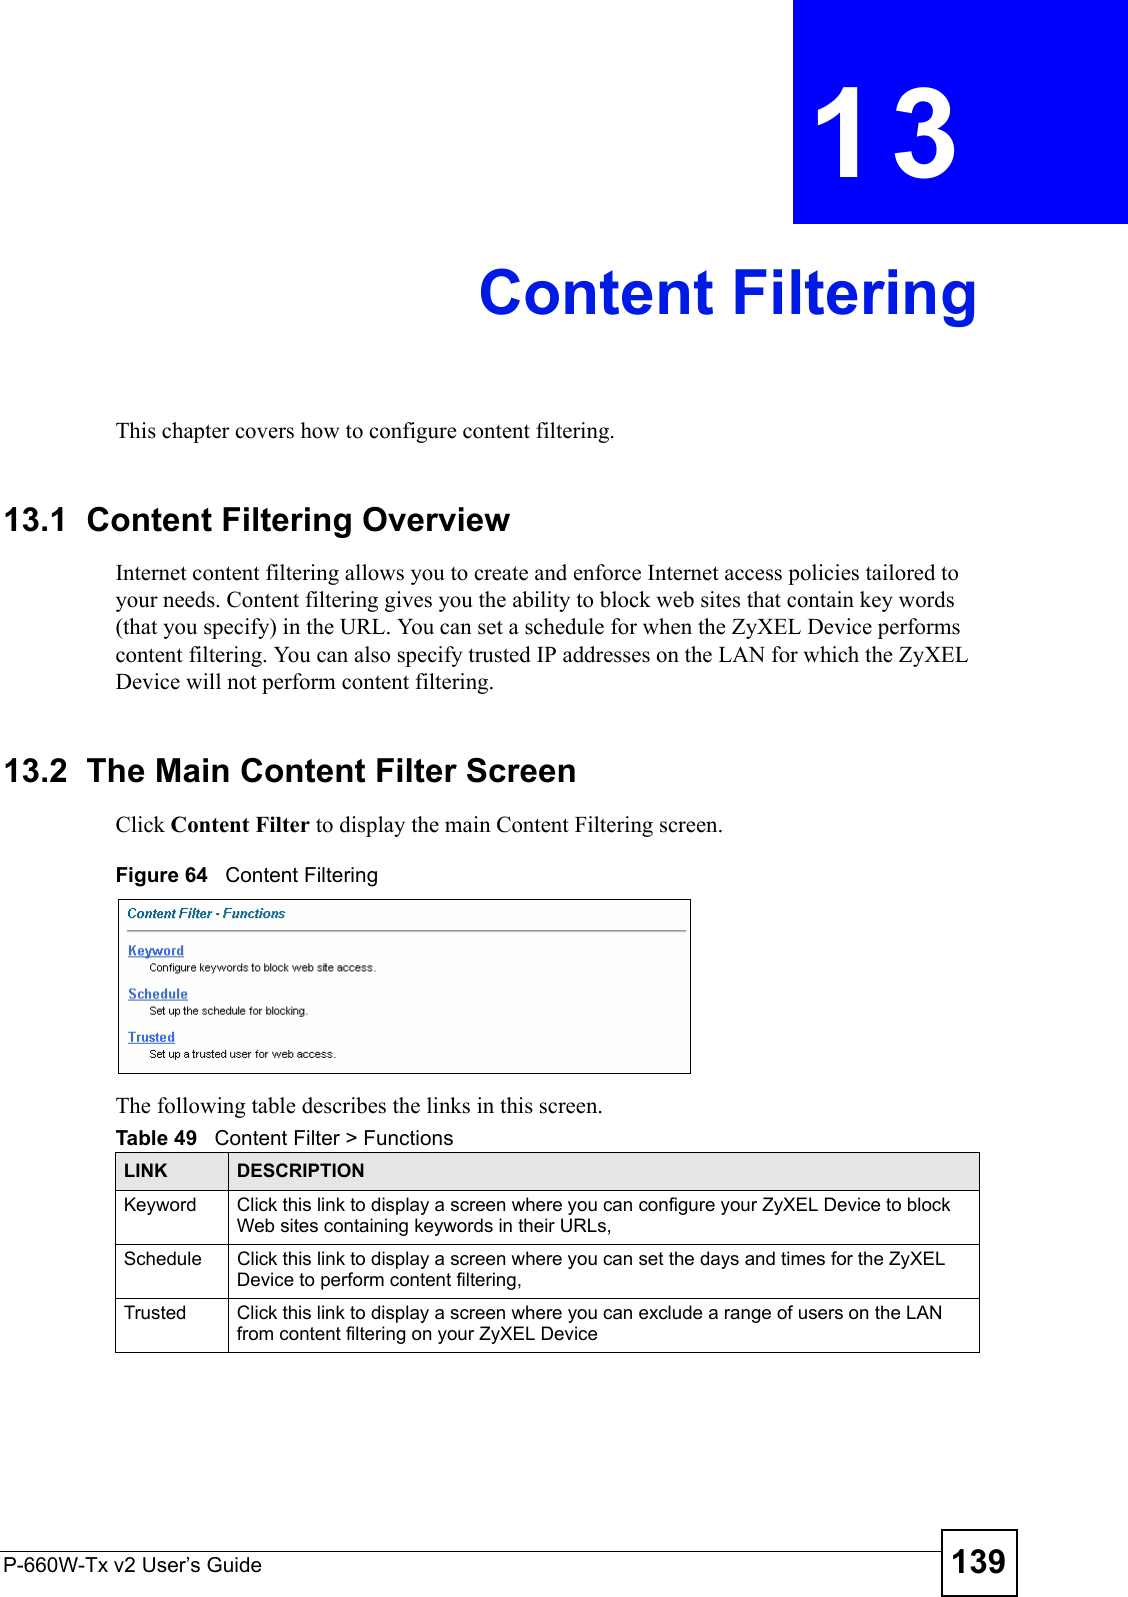 P-660W-Tx v2 User’s Guide 139CHAPTER  13 Content FilteringThis chapter covers how to configure content filtering.13.1  Content Filtering Overview Internet content filtering allows you to create and enforce Internet access policies tailored to your needs. Content filtering gives you the ability to block web sites that contain key words (that you specify) in the URL. You can set a schedule for when the ZyXEL Device performs content filtering. You can also specify trusted IP addresses on the LAN for which the ZyXEL Device will not perform content filtering.13.2  The Main Content Filter Screen Click Content Filter to display the main Content Filtering screen. Figure 64   Content Filtering The following table describes the links in this screen. Table 49   Content Filter &gt; FunctionsLINK DESCRIPTIONKeyword Click this link to display a screen where you can configure your ZyXEL Device to block Web sites containing keywords in their URLs, Schedule Click this link to display a screen where you can set the days and times for the ZyXEL Device to perform content filtering, Trusted Click this link to display a screen where you can exclude a range of users on the LAN from content filtering on your ZyXEL Device